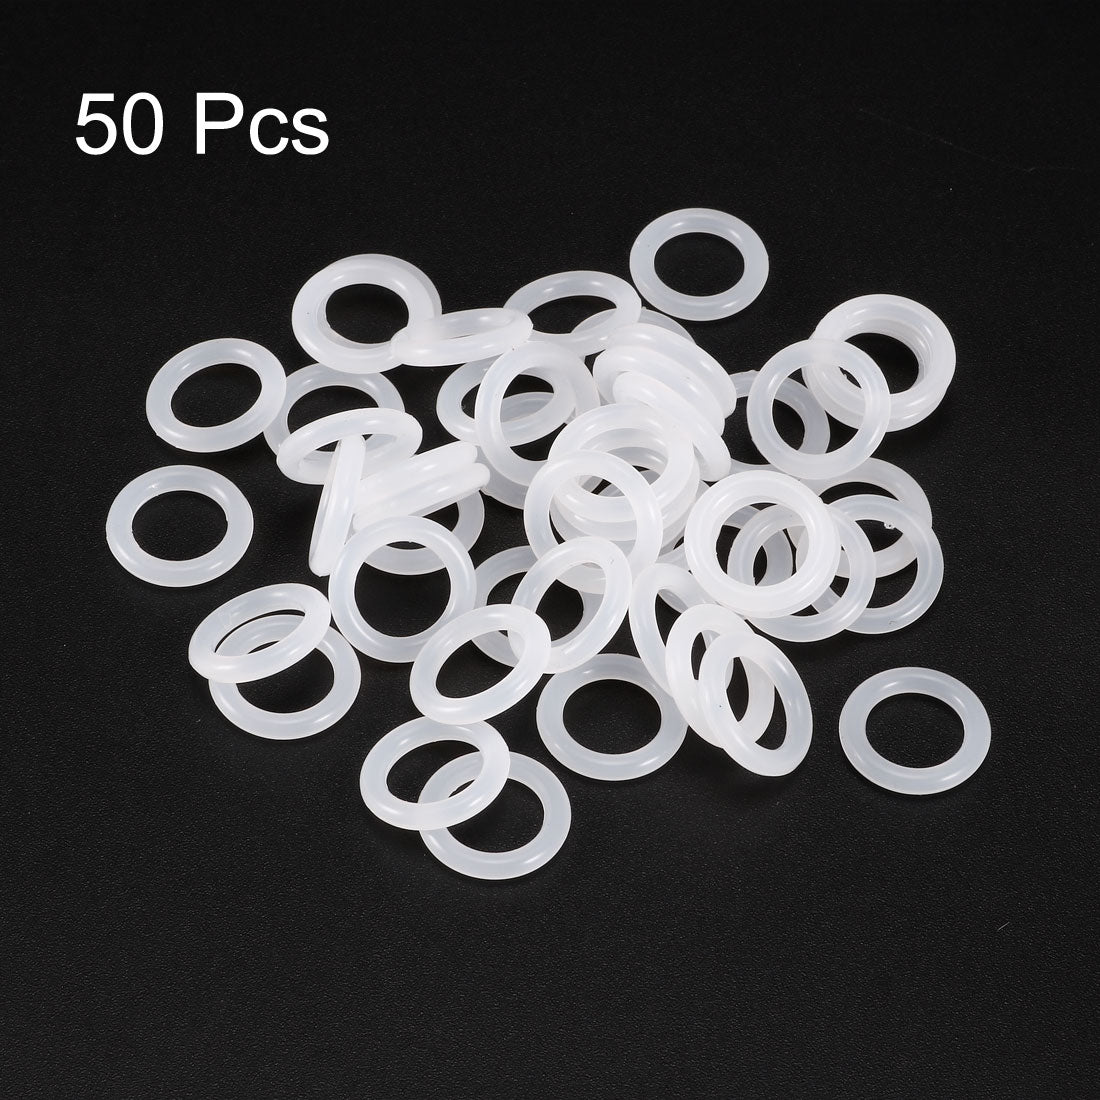 uxcell Uxcell Silicone O-Rings 14mm OD, 9.2mm ID, 2.4mm Width, Seal Gasket White 50Pcs